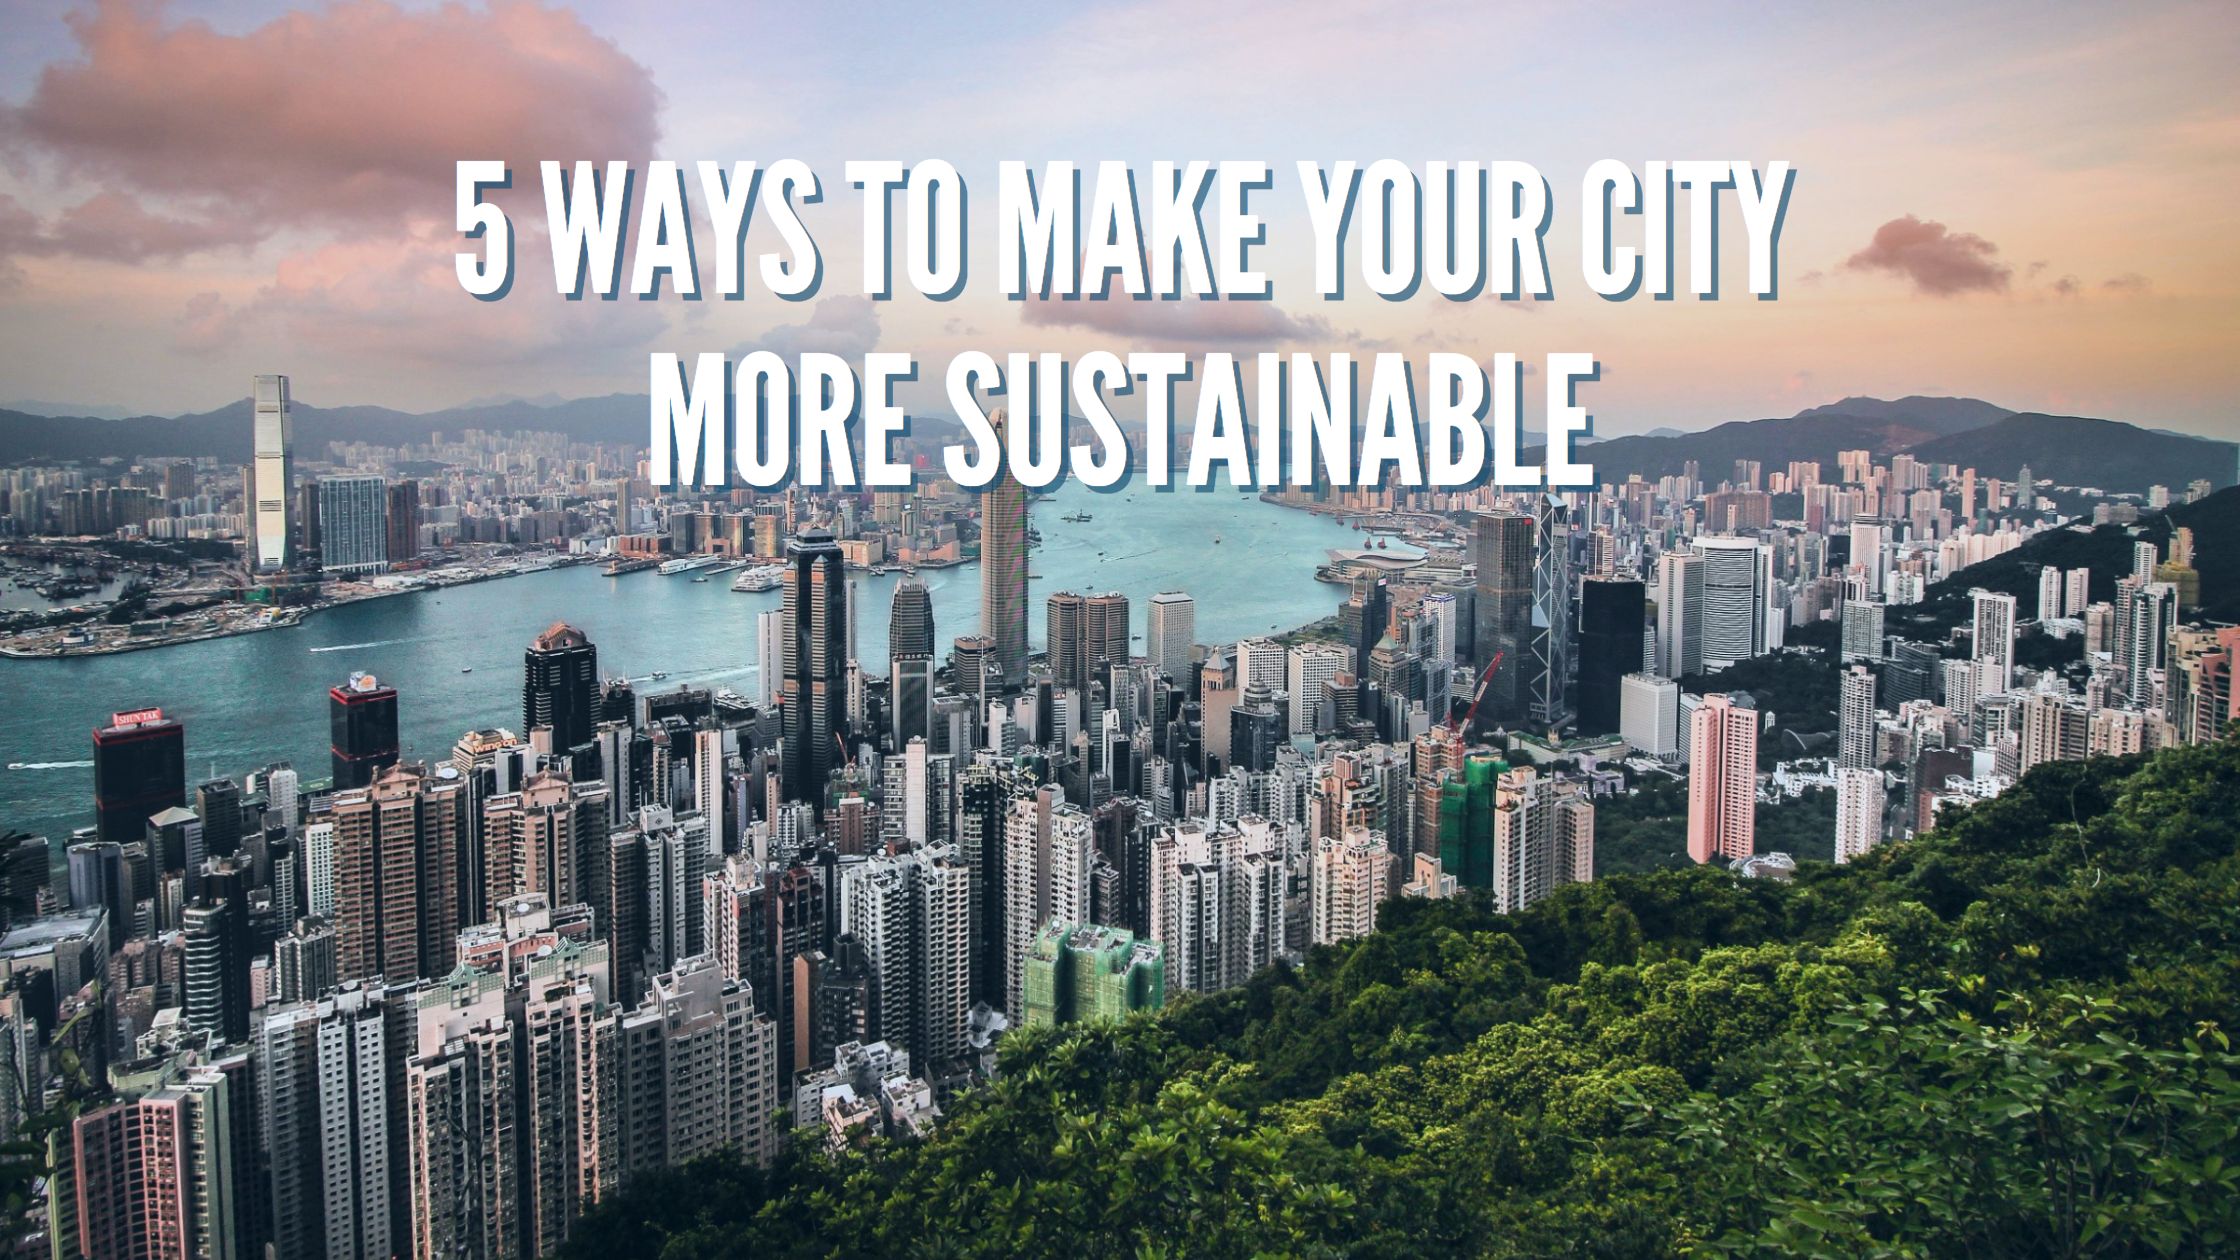 5 Ways to Make Your City More Sustainable